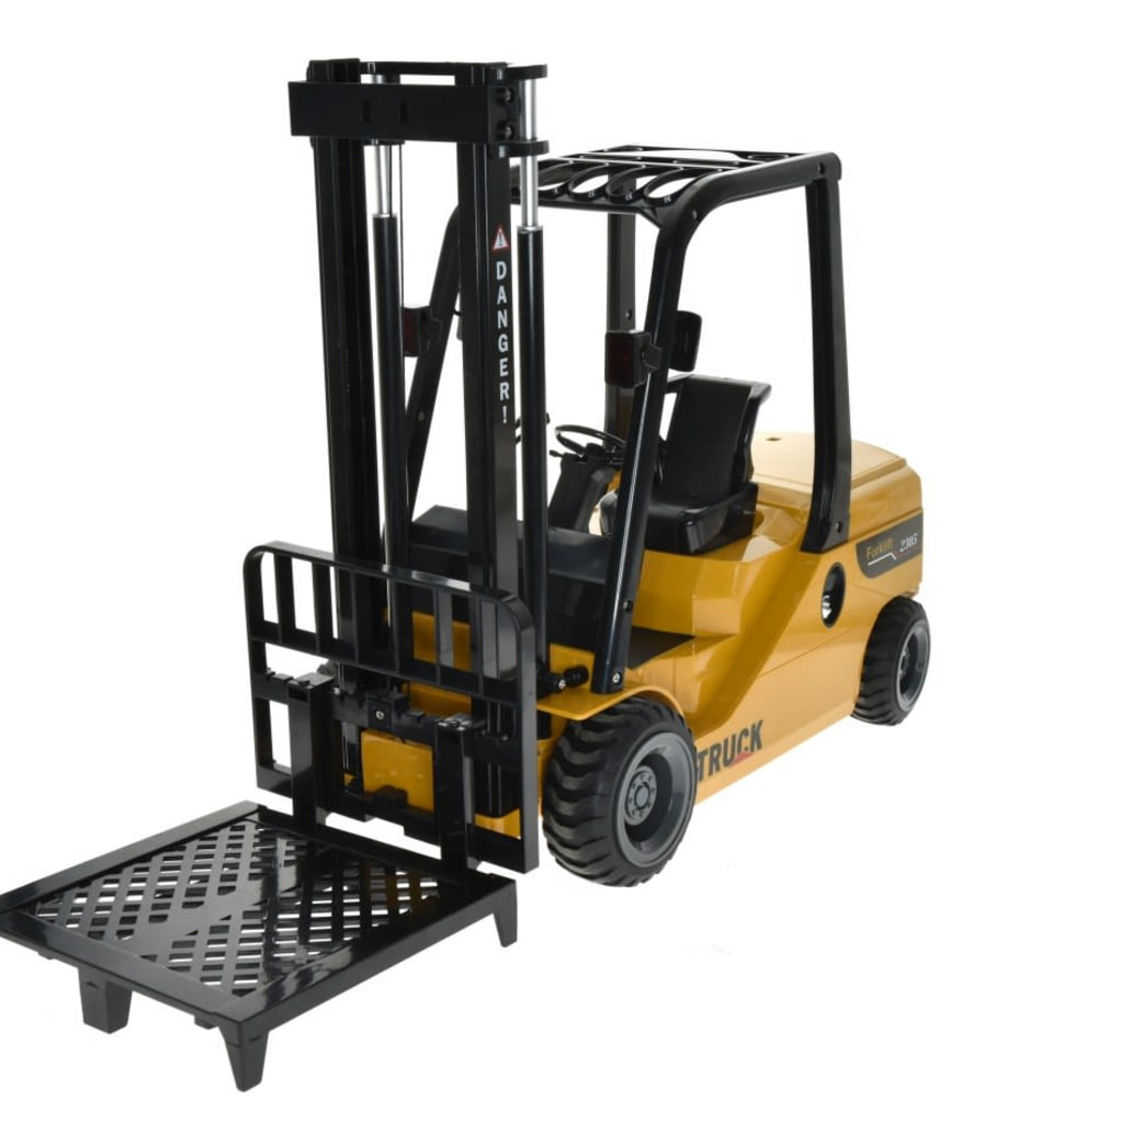 CIS-2305 1:14 scale fork lift with lights sound 2.4 GHz rechargeable batteries - Image 3 of 5